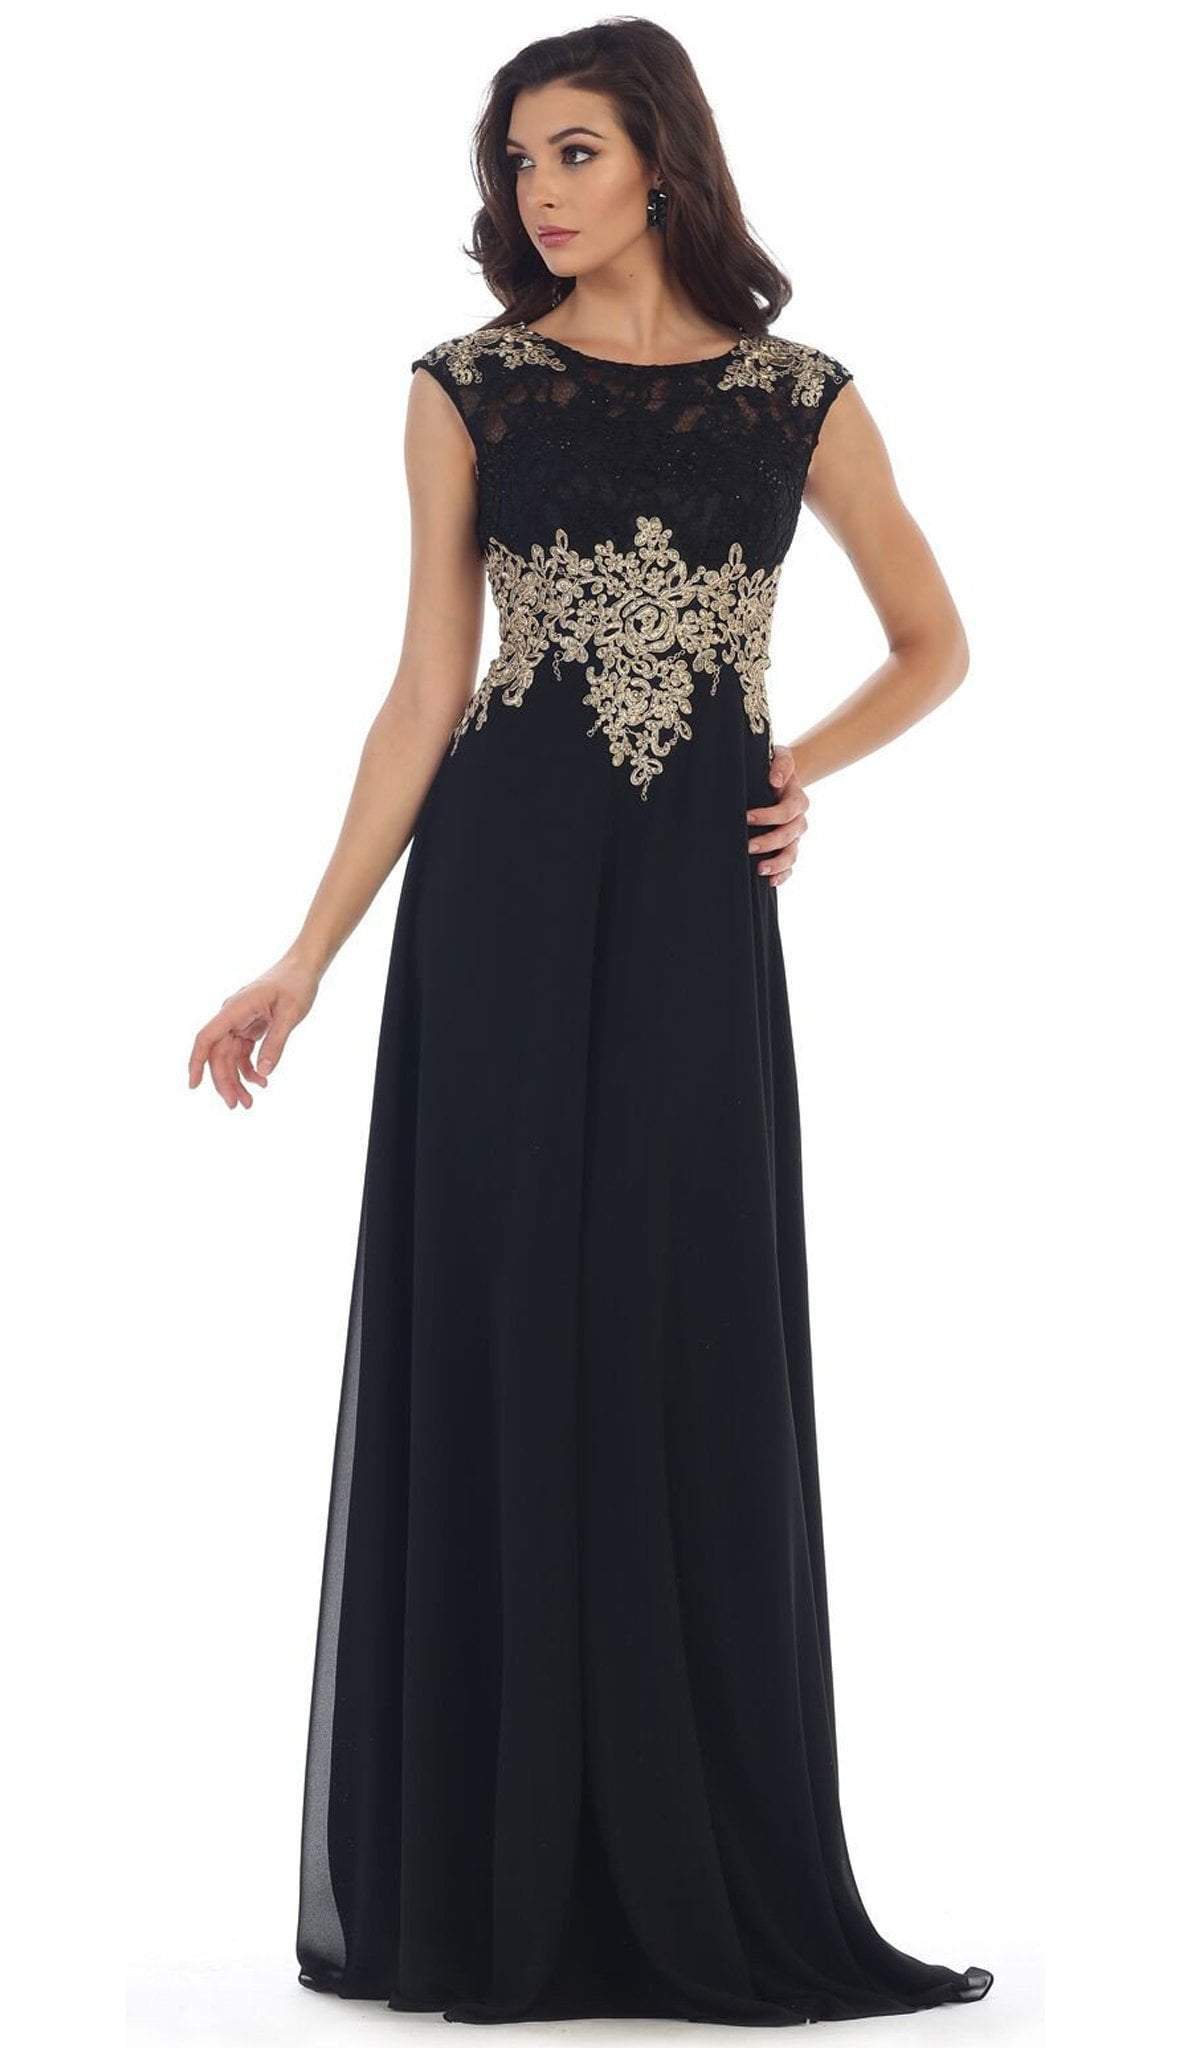 May Queen - Gilded Lace Illusion Bateau A-line Evening Dress Special Occasion Dress 4 / Black